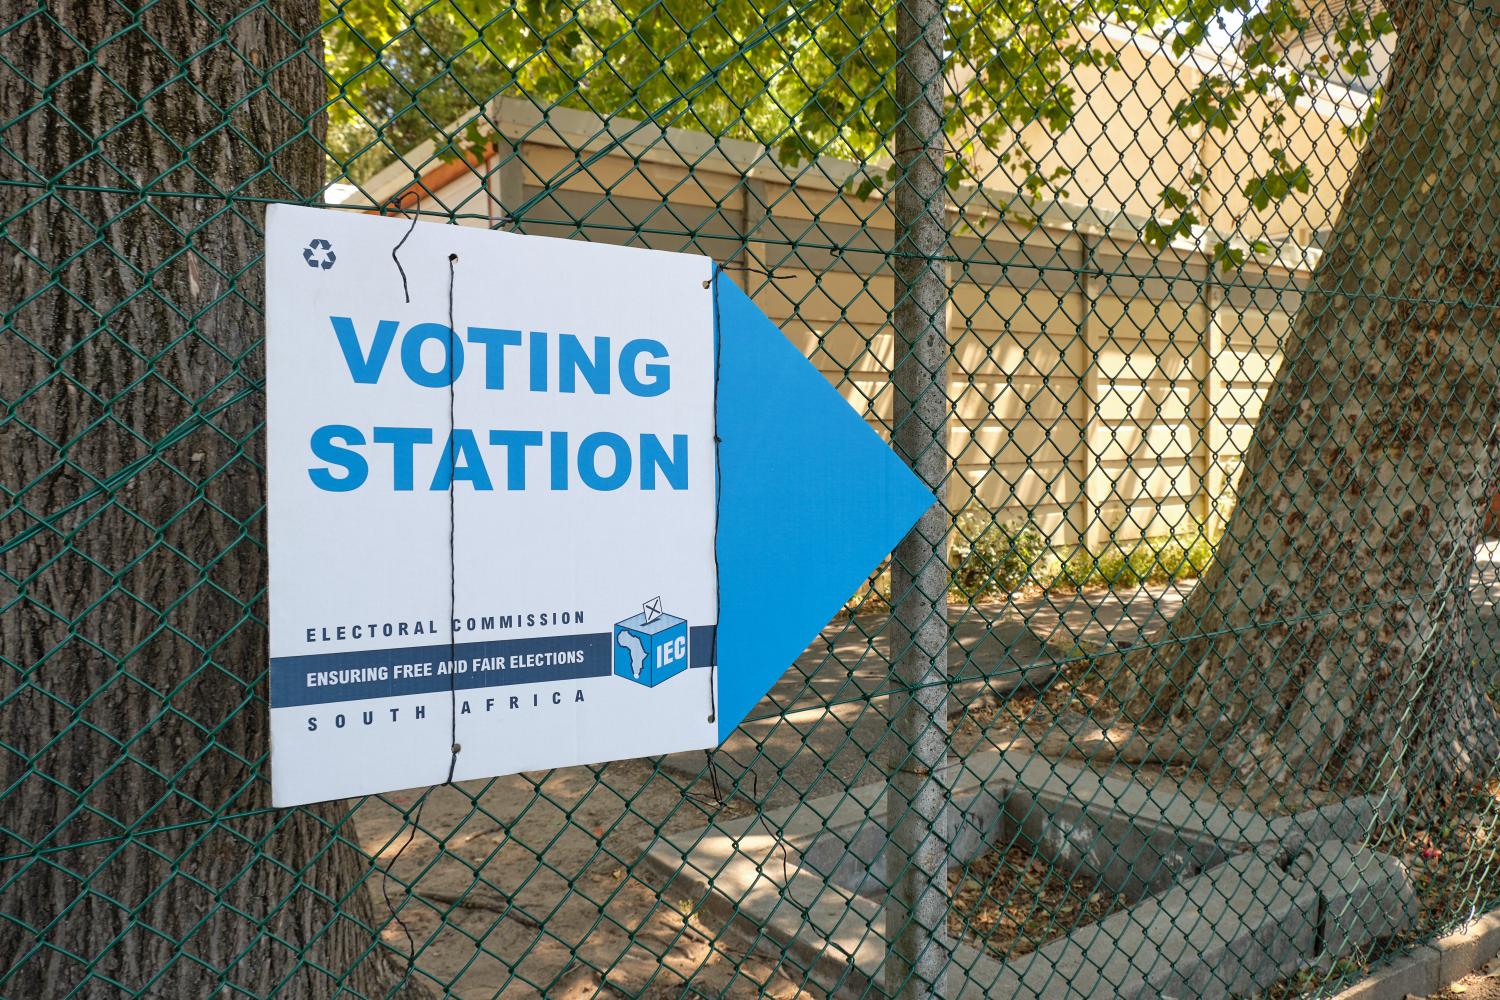 South African election voting station sign from the electoral commission, with the polling station in background. Cape Town, South Africa - Circa 2019